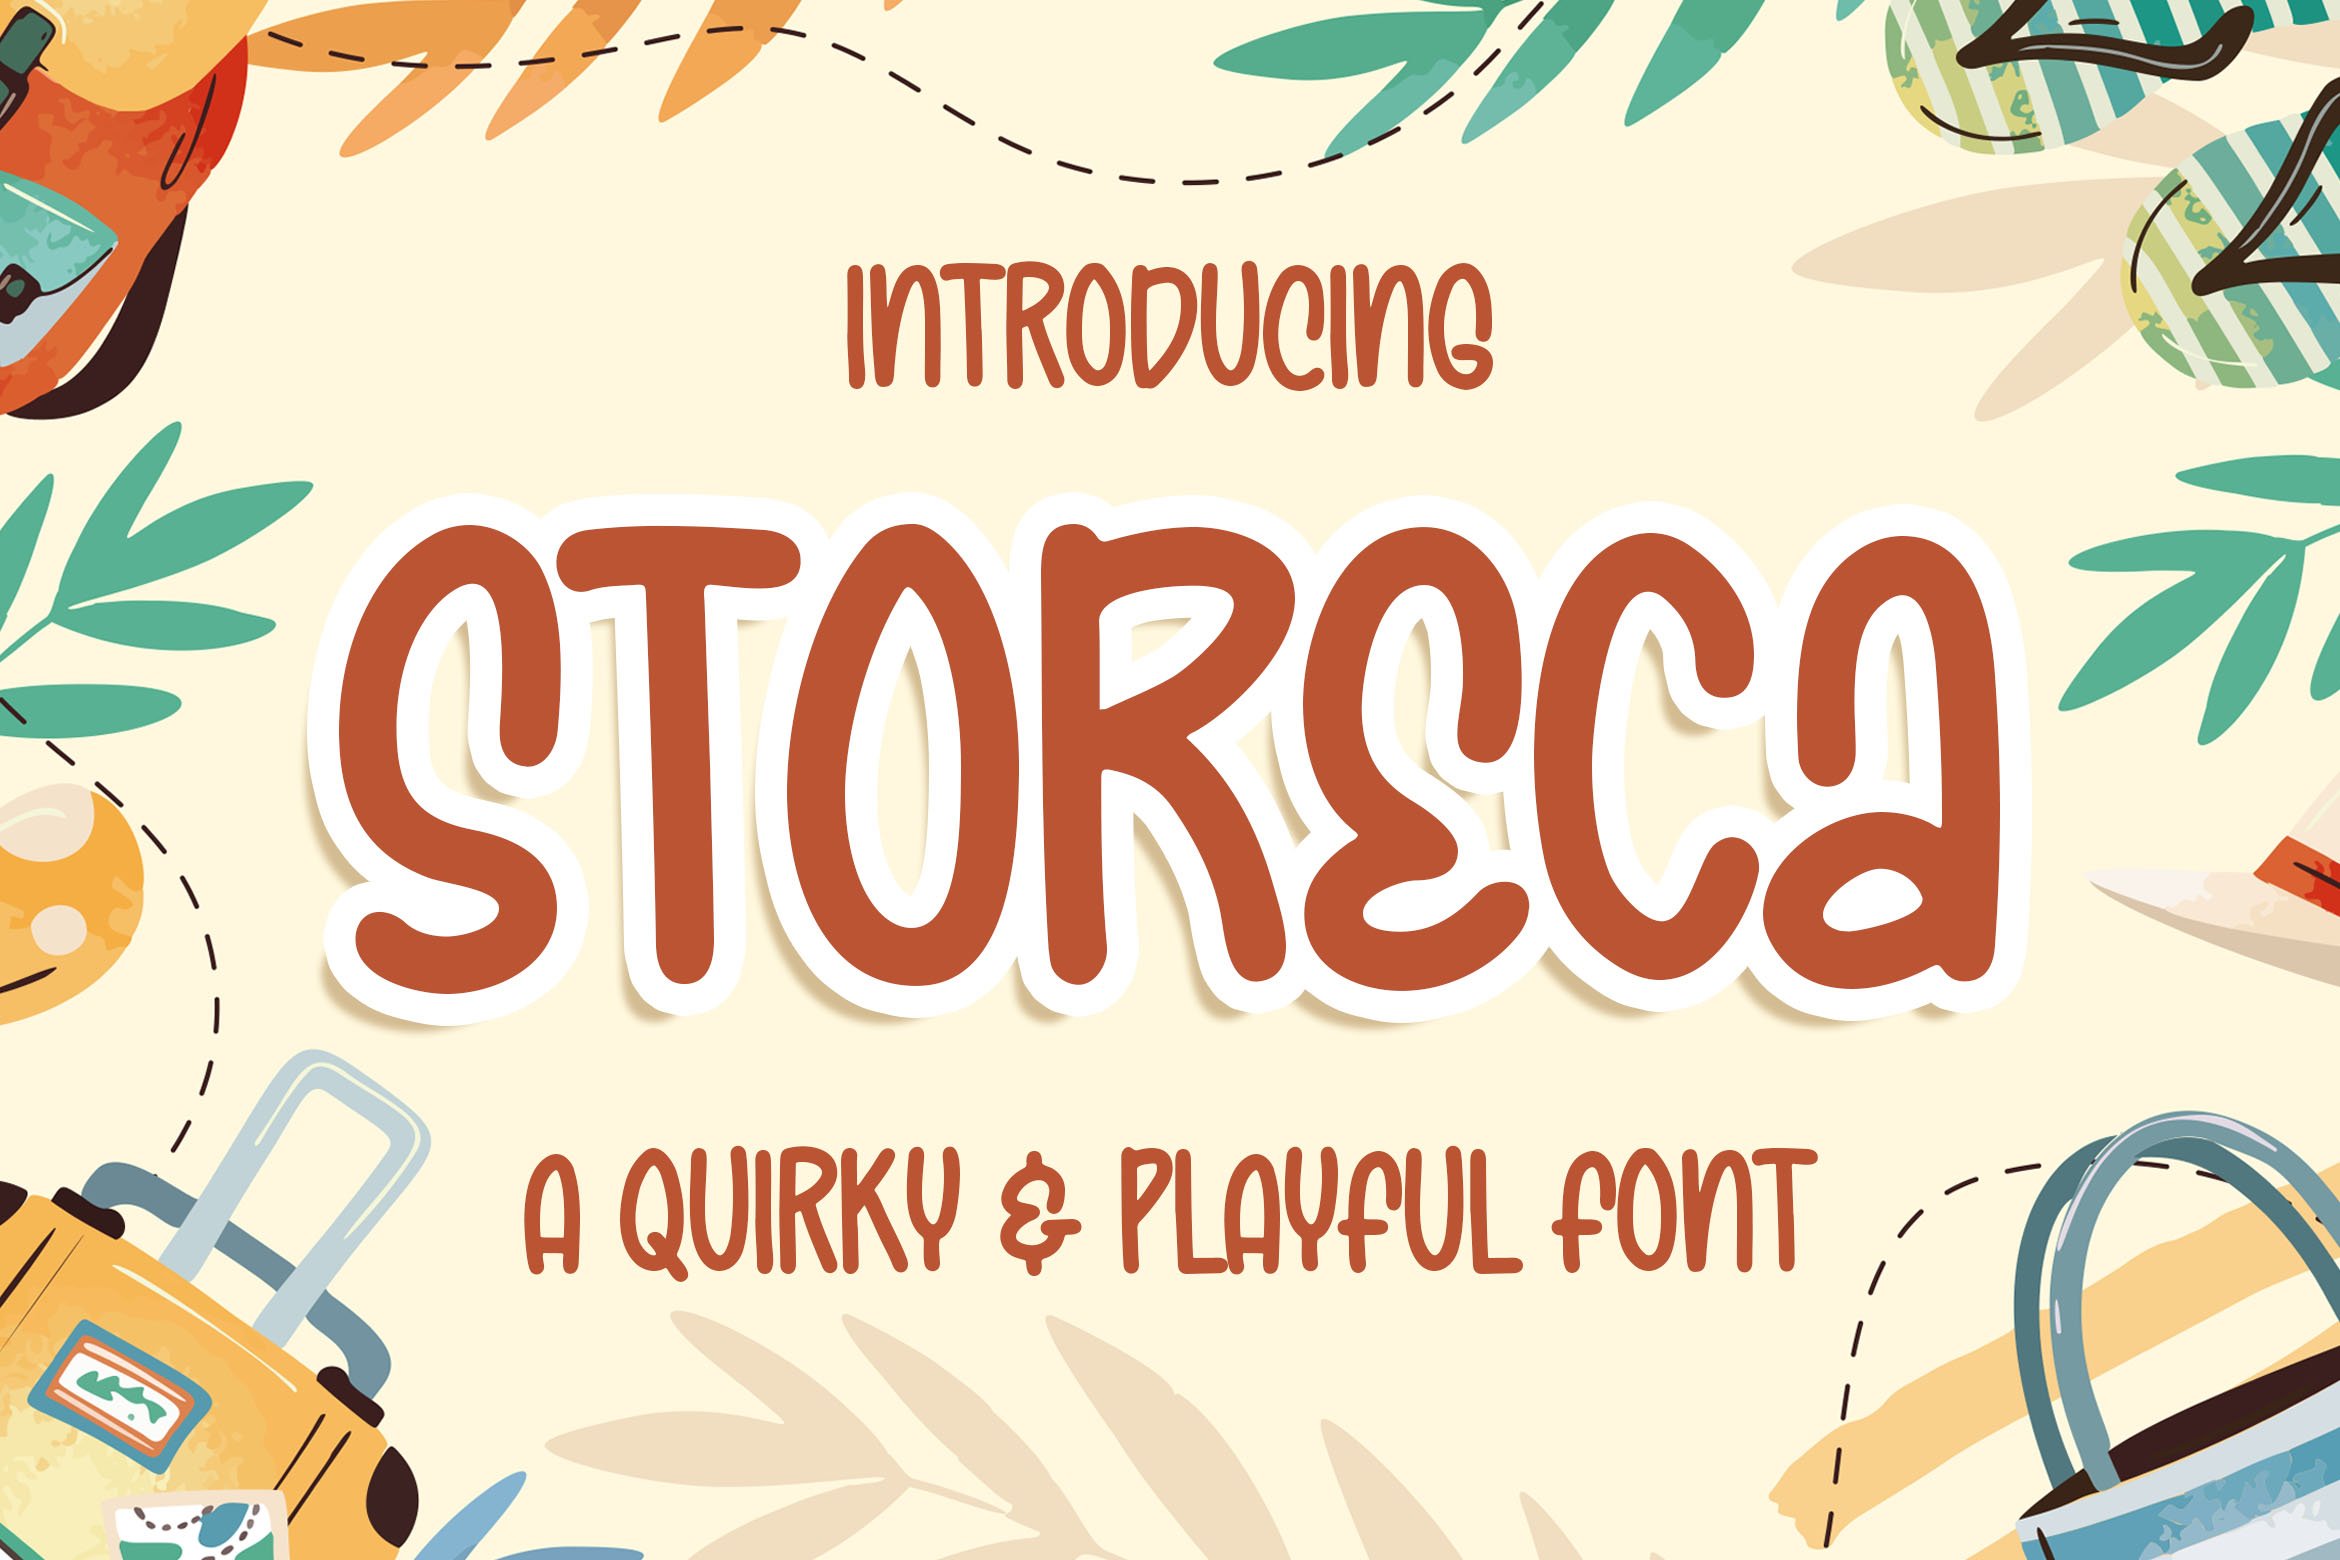 Storeca a Quirky & Playful Font cover image.